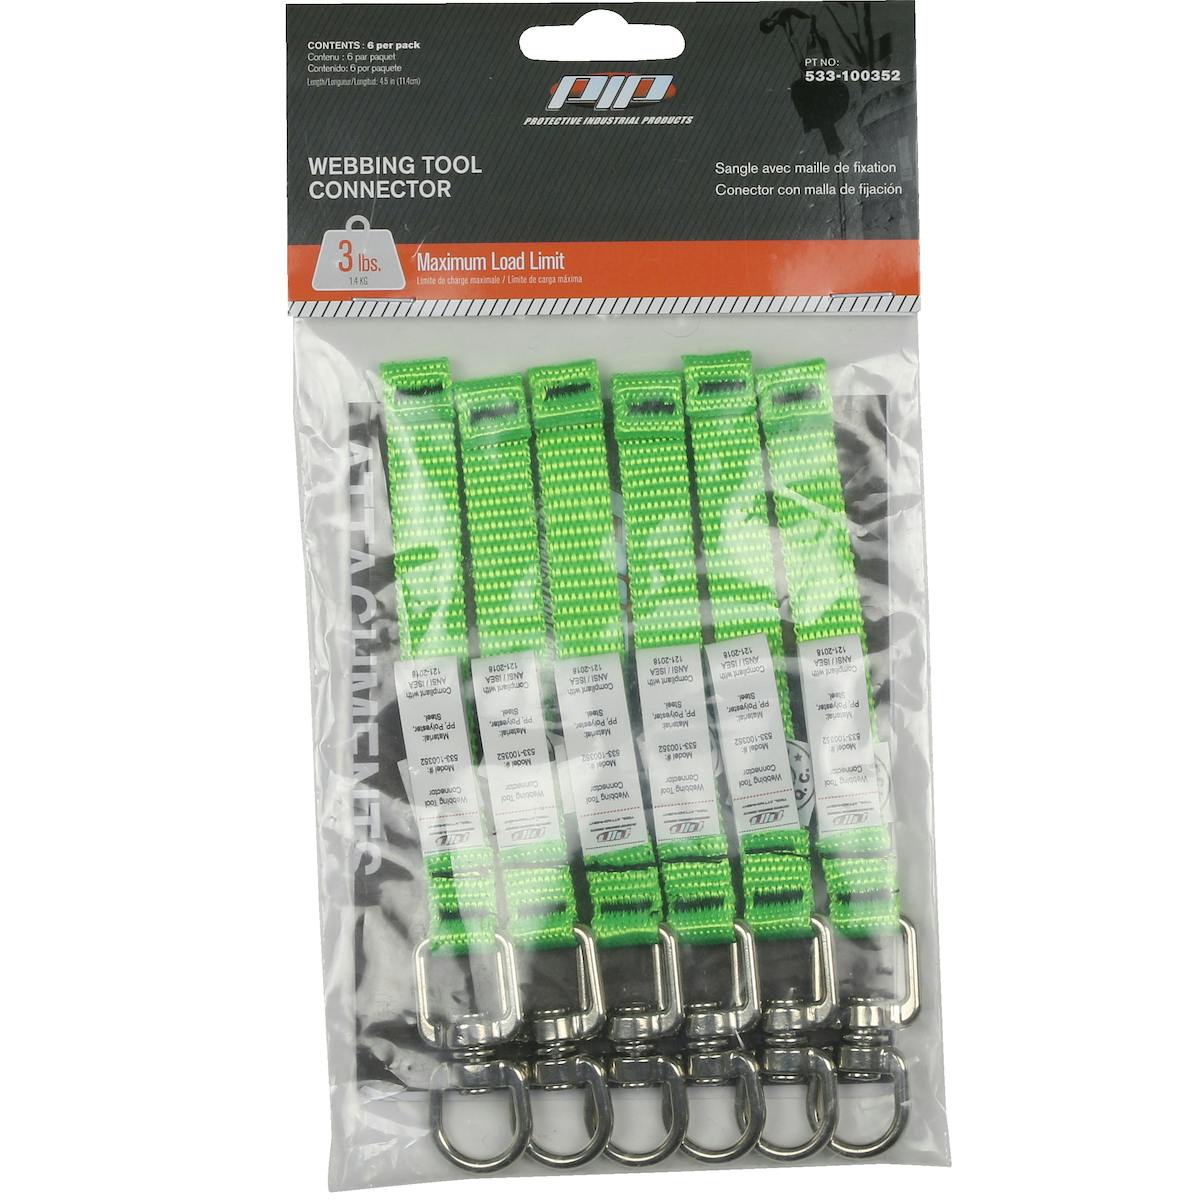 Webbing Tool Connector 4.5" - 3 lbs. maximum load limit - Retail Packaged, Green (533-100352) - OS_0